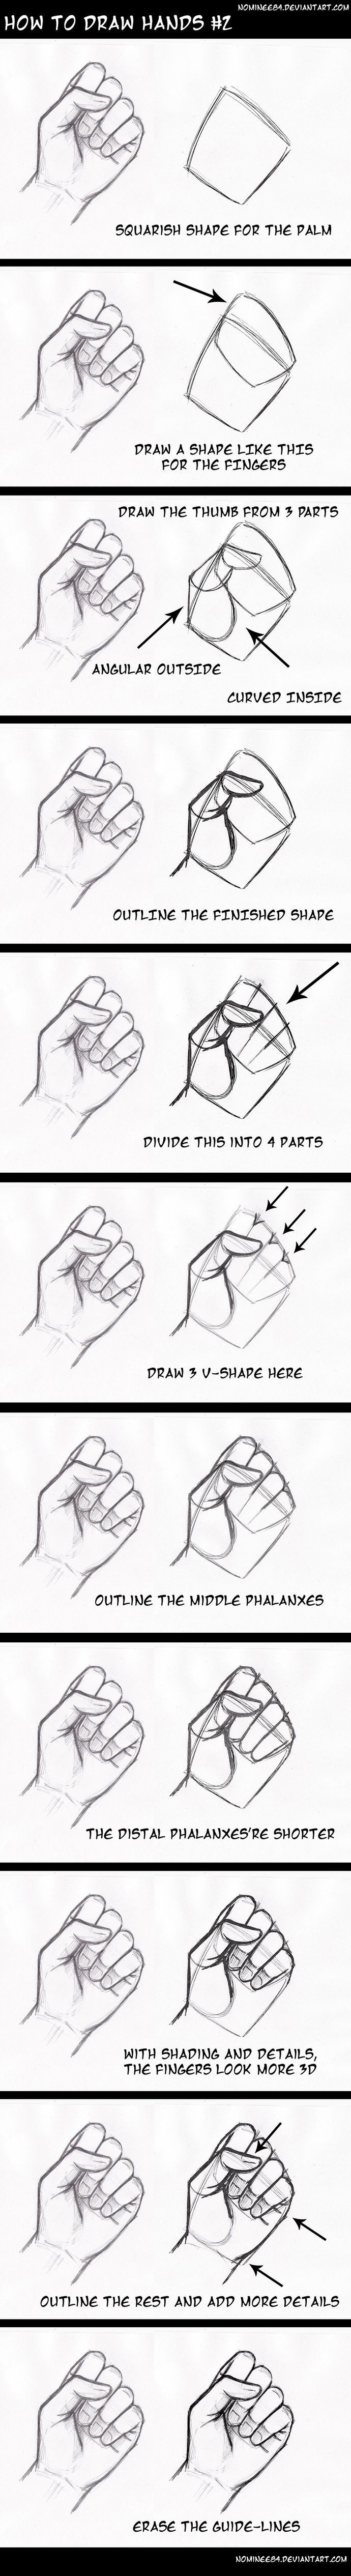 how to draw hands2 by nominee84 on DeviantArt